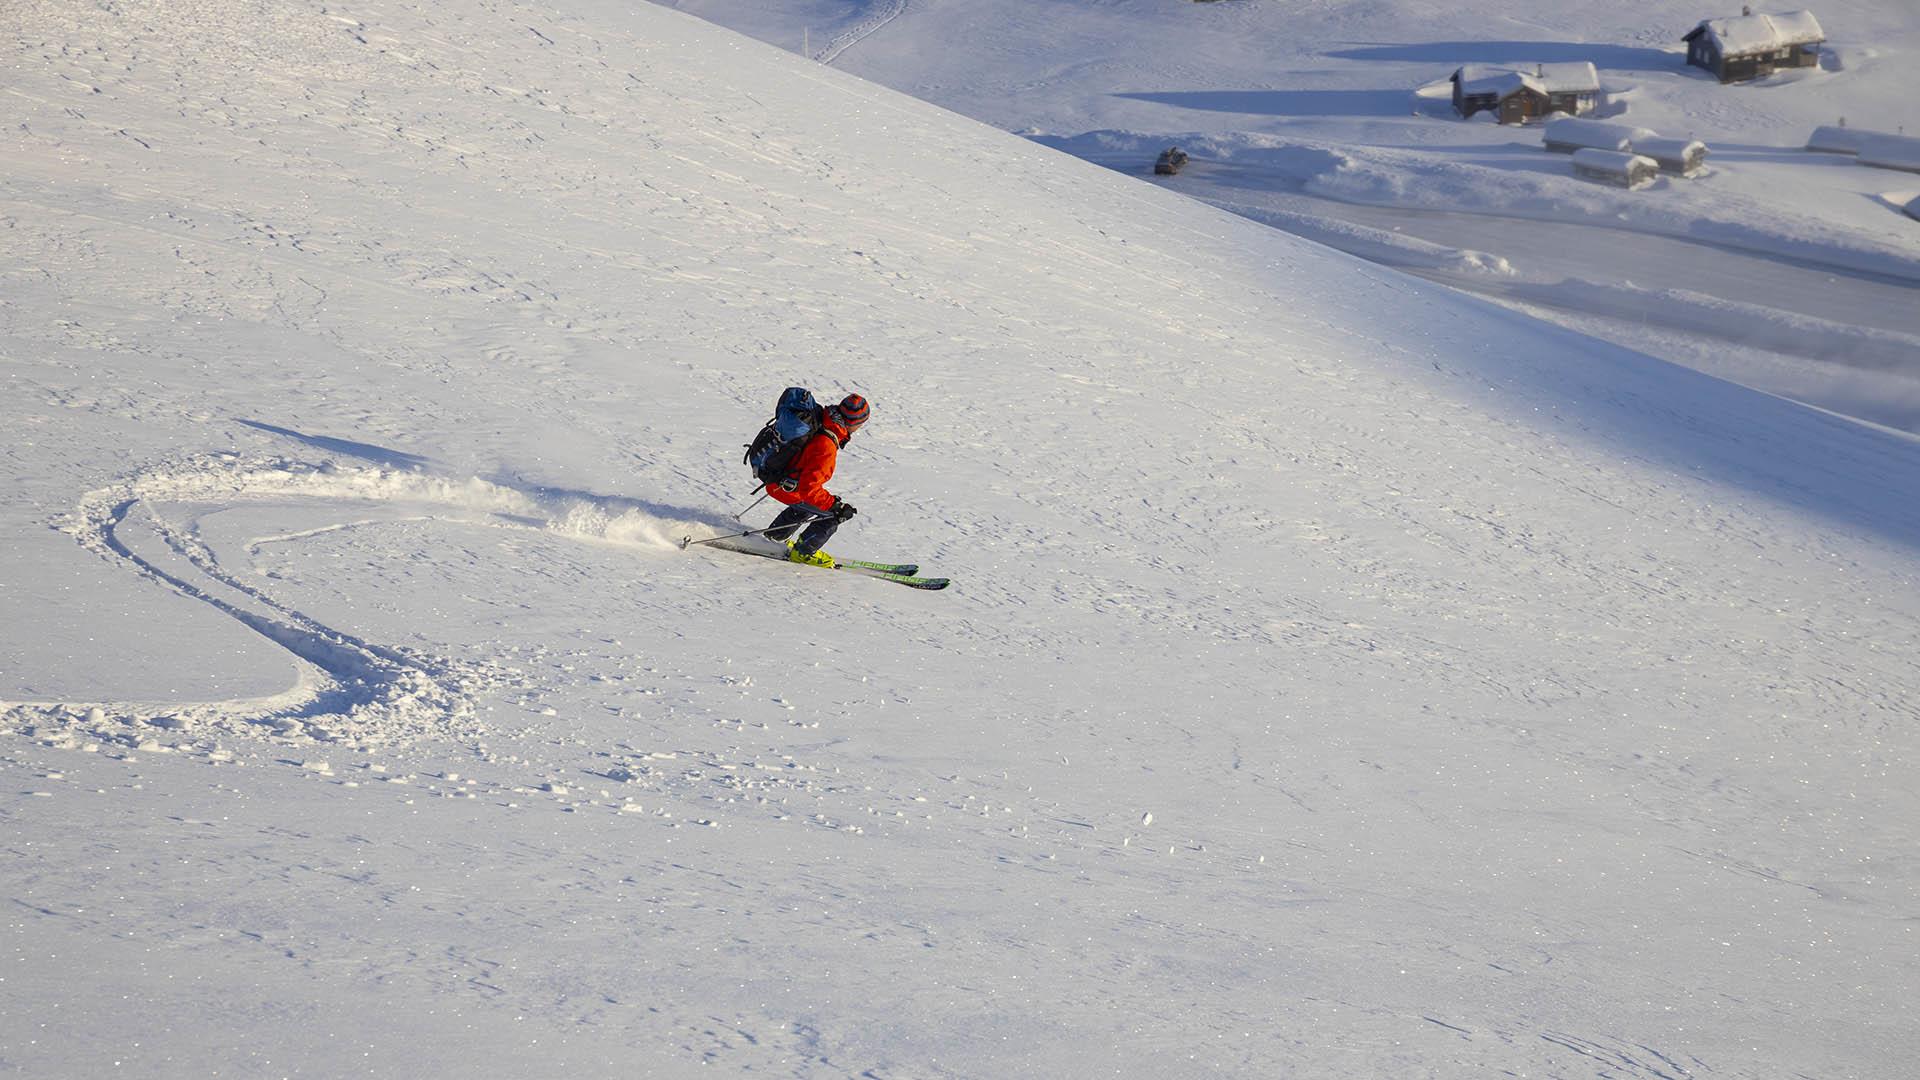 Person on the way down a mountain side on randonee skis.